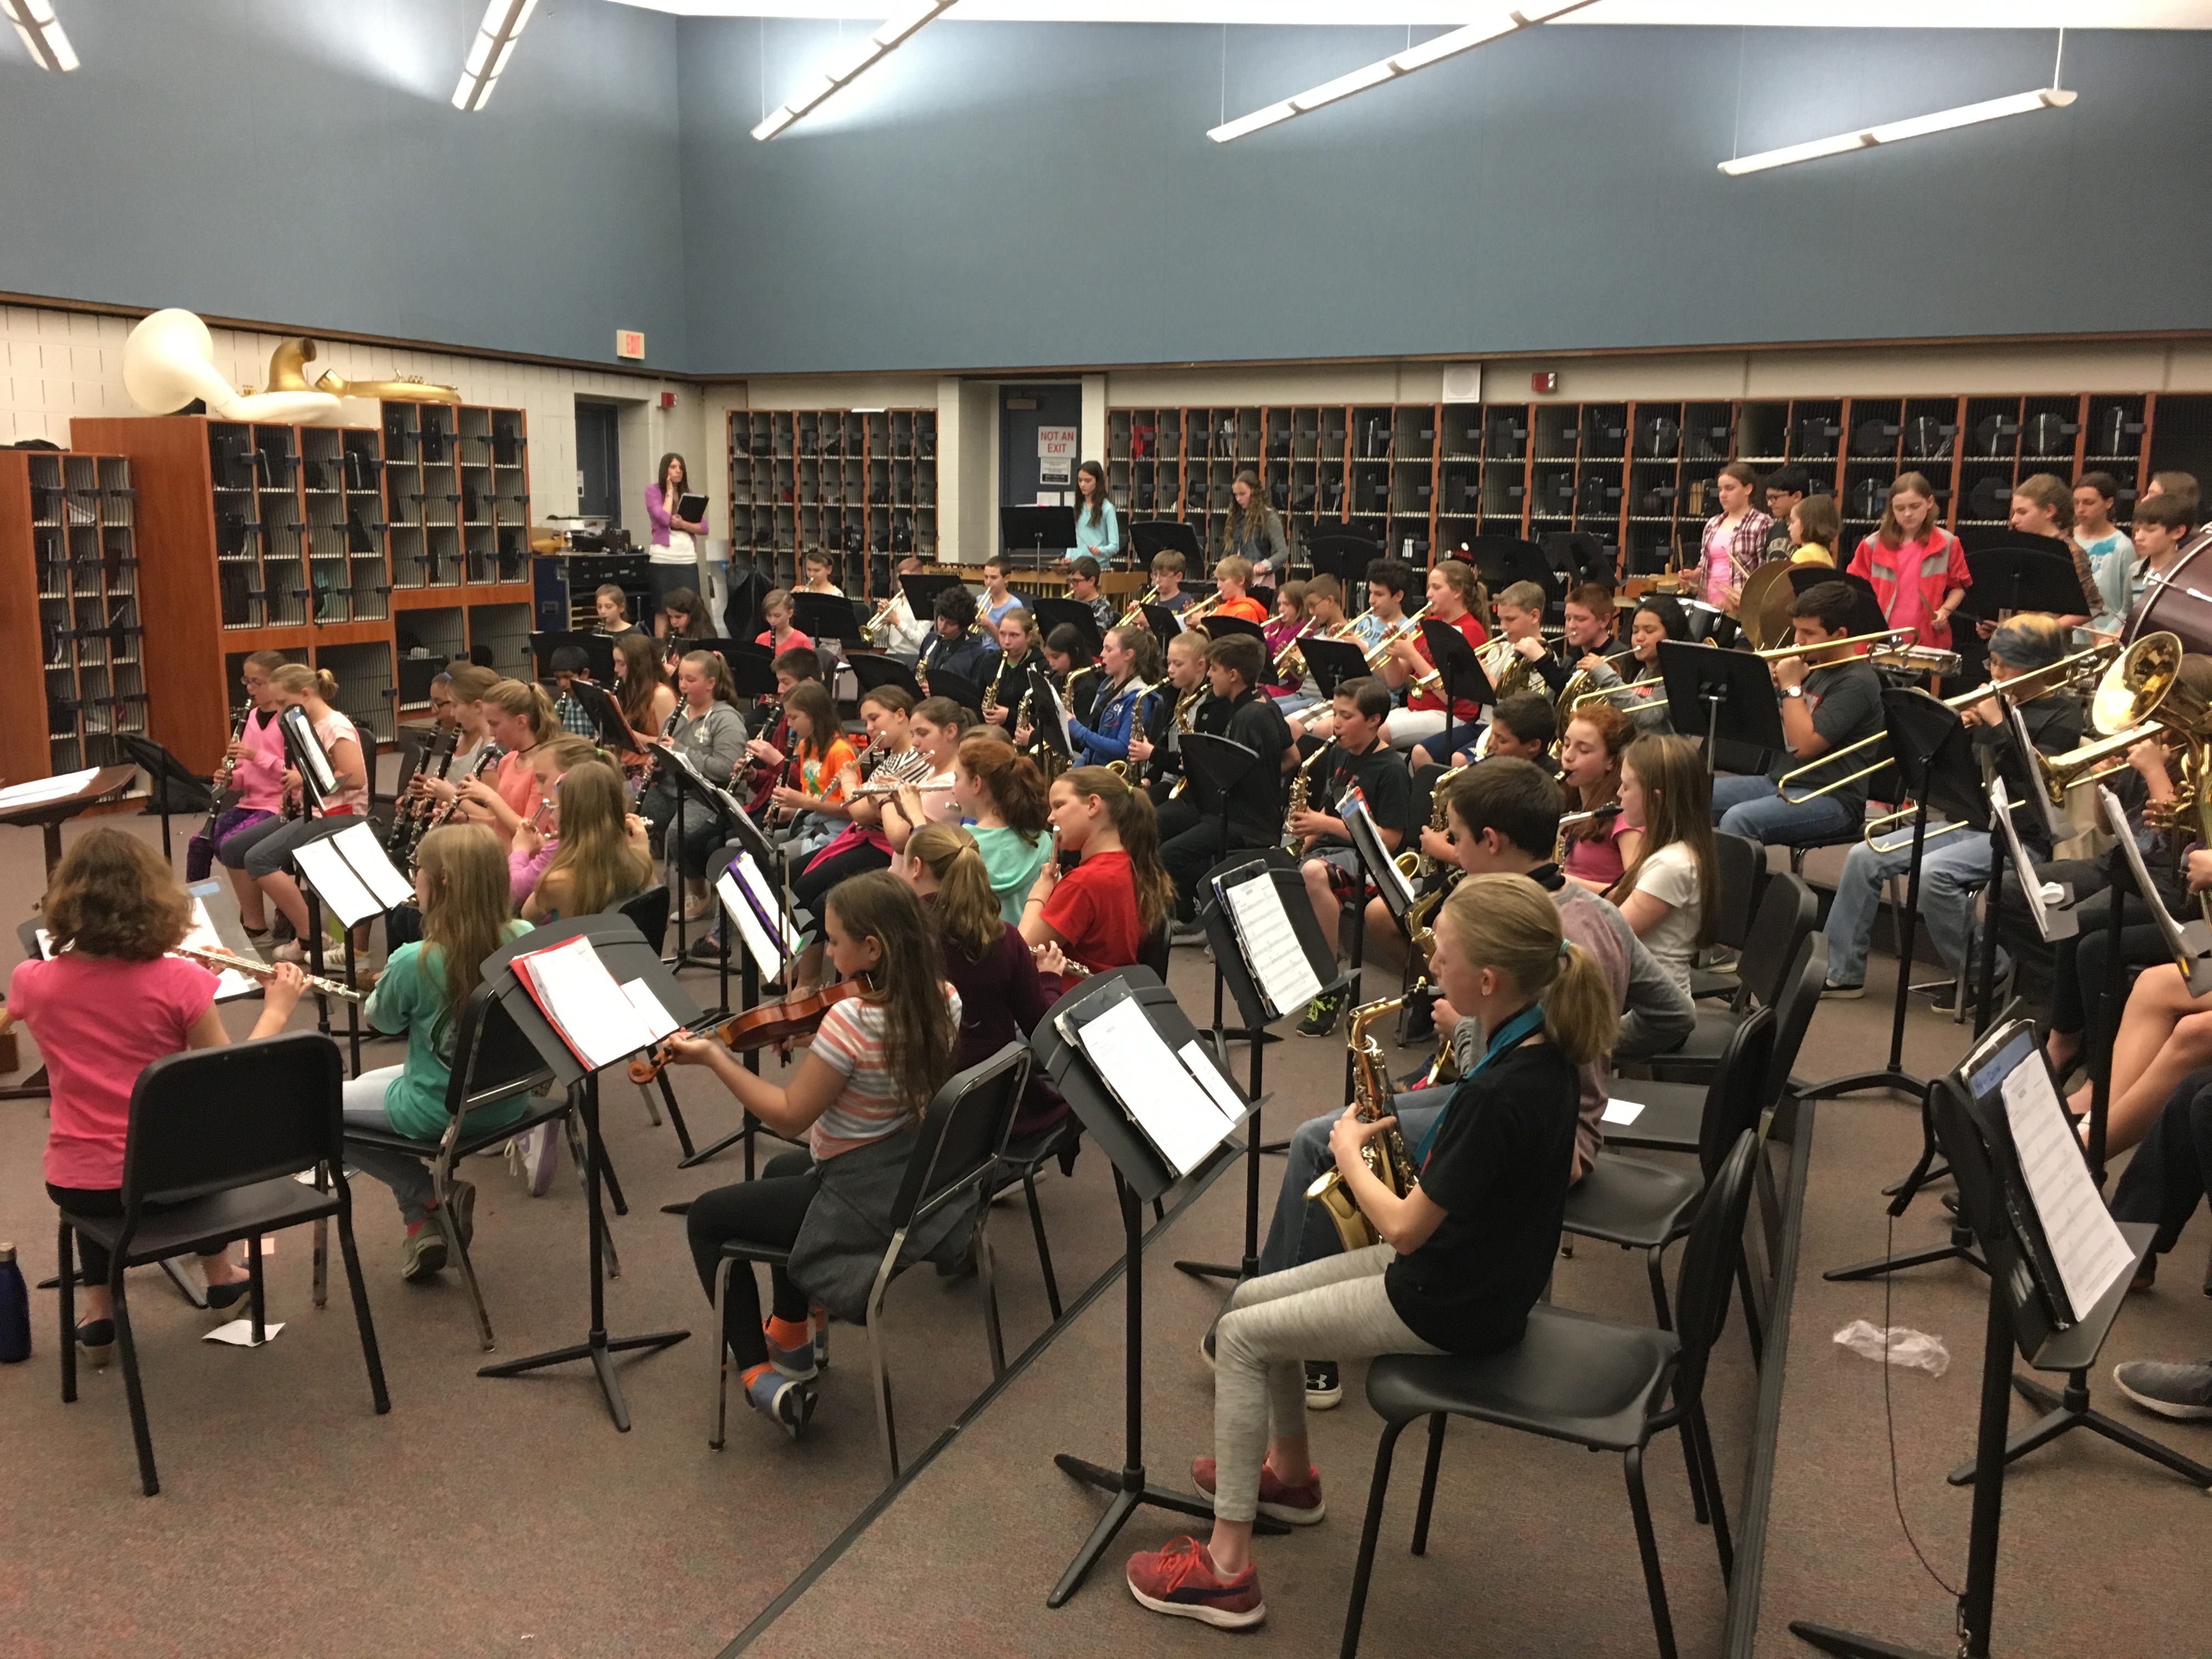 BES band students rehearsing before their performance